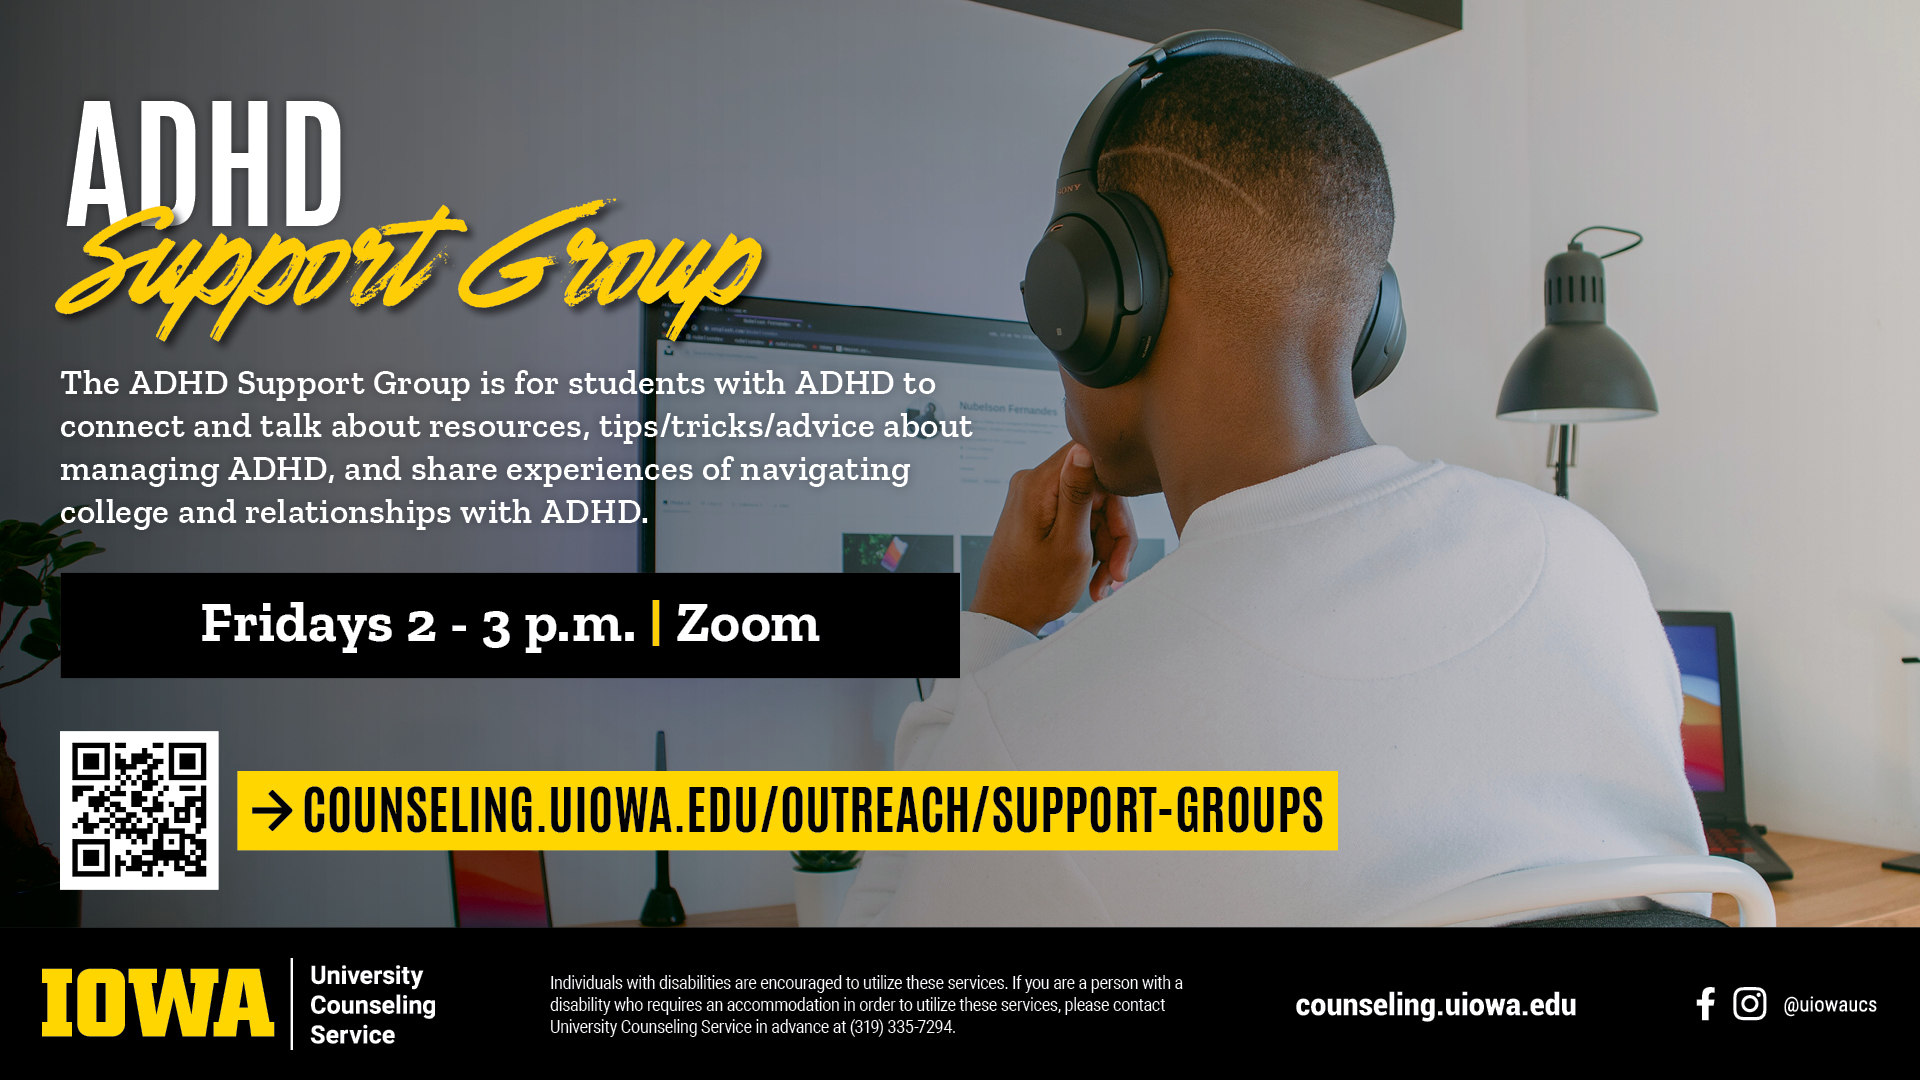 ADHD support group Fridays 2-3 on Zoom